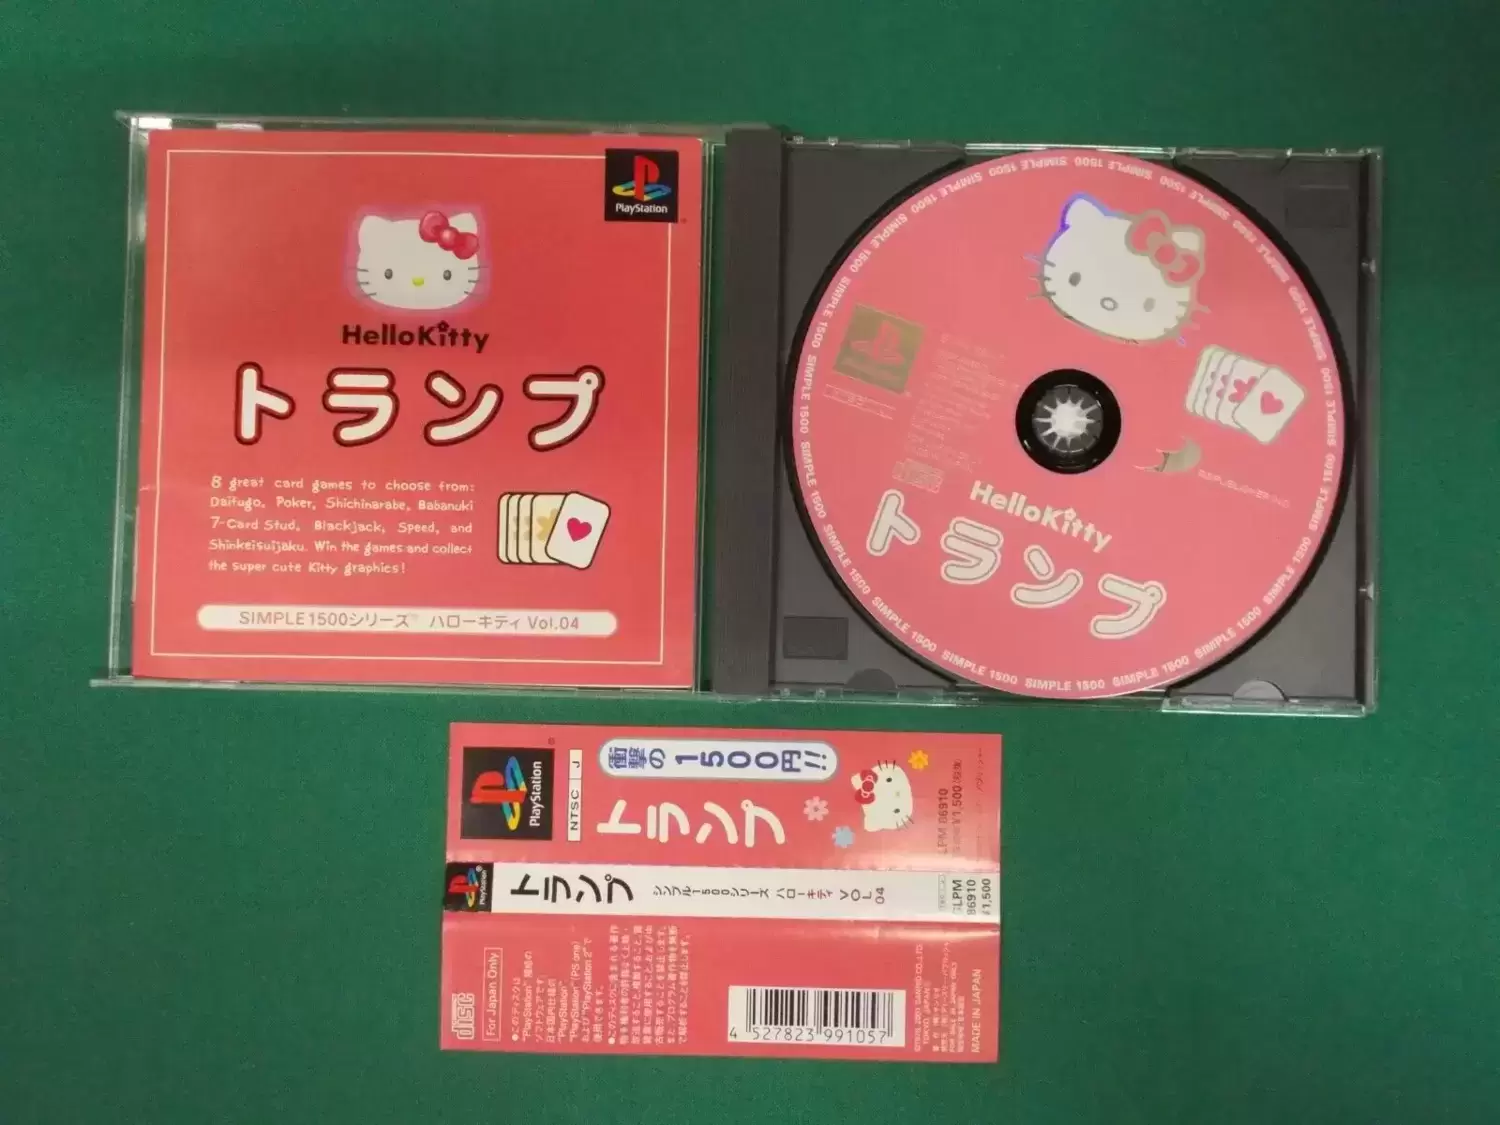 Jeux Playstation PS1 - simple 1500 series: hello kitty vol 04